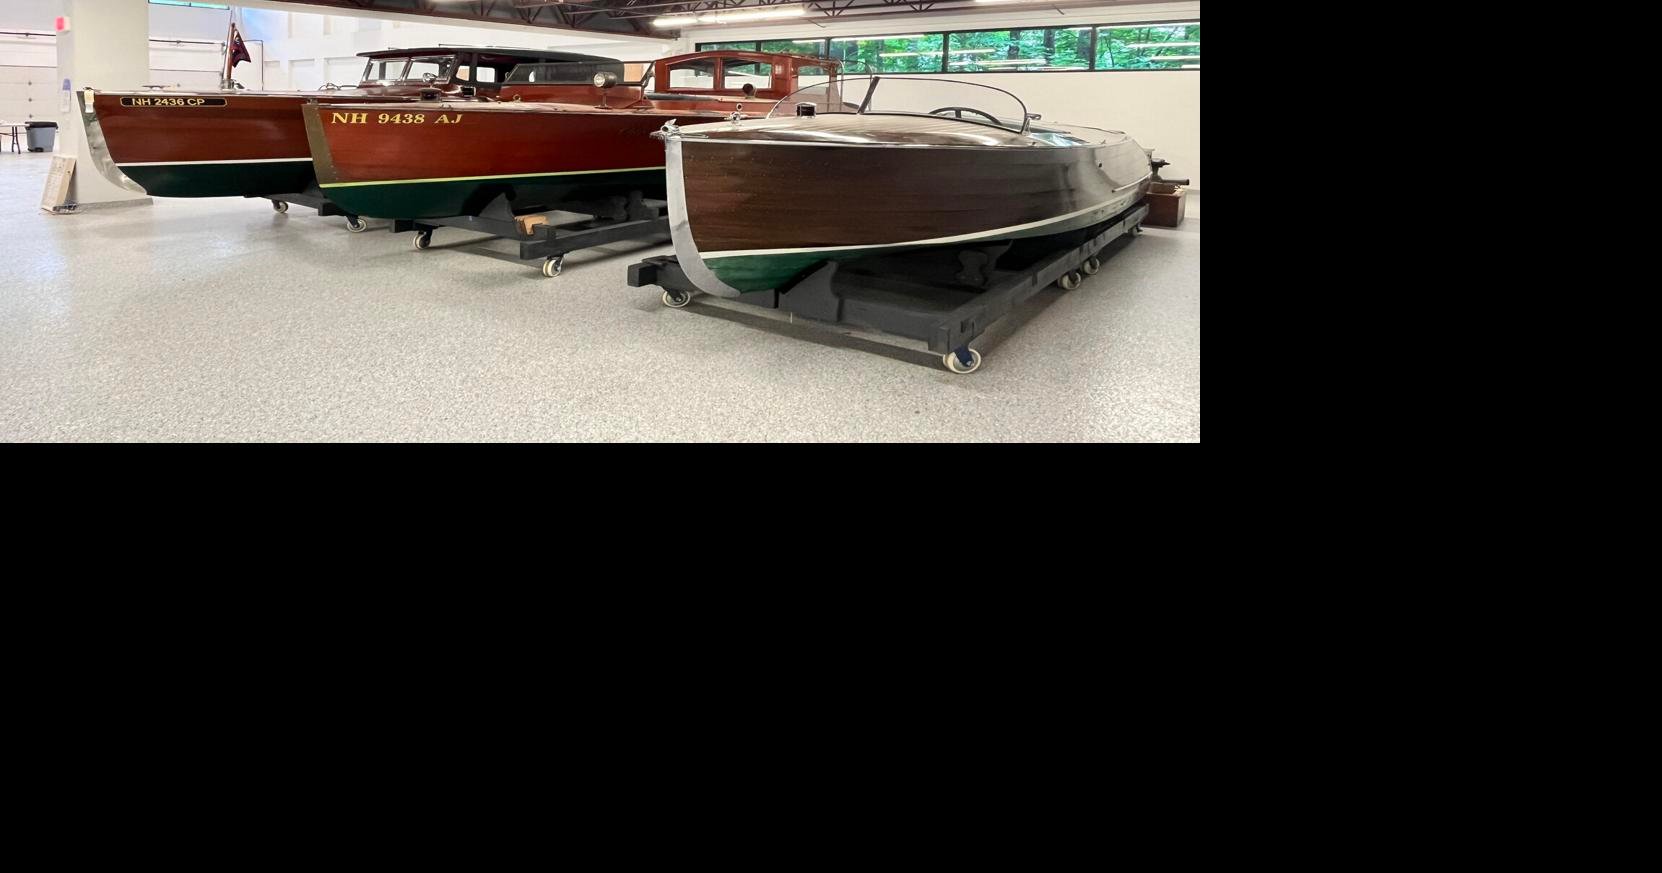 New Hampshire Boat Museum showing off new home July 5